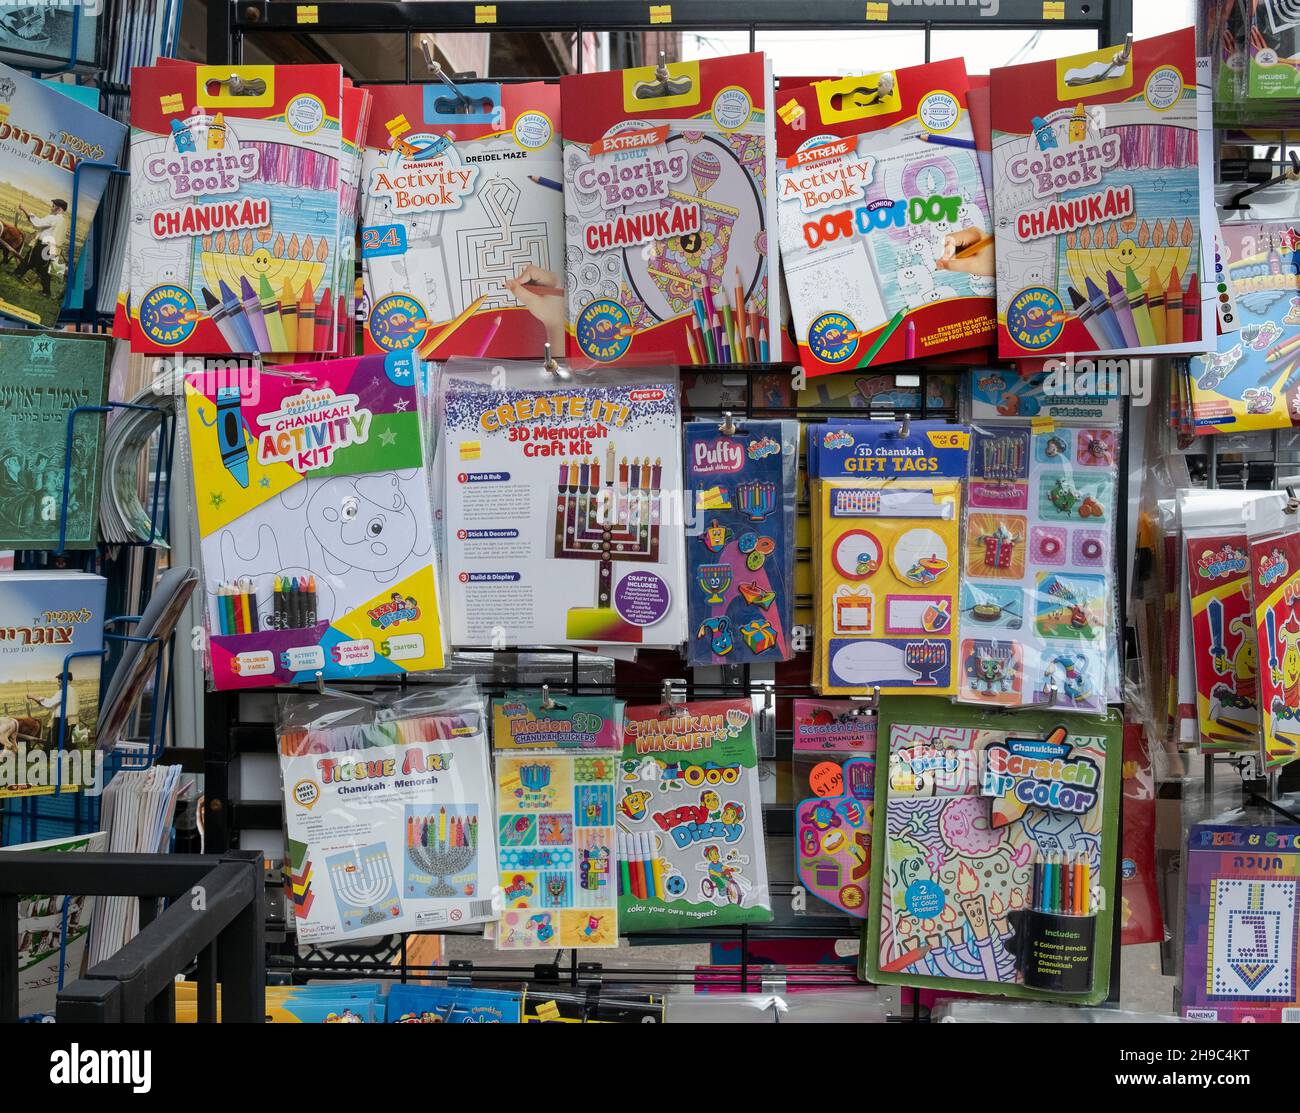 Chanukah coloring books and art books for sale at a store on Lee avenue n Williamsburg, Brooklyn, New York Stock Photo